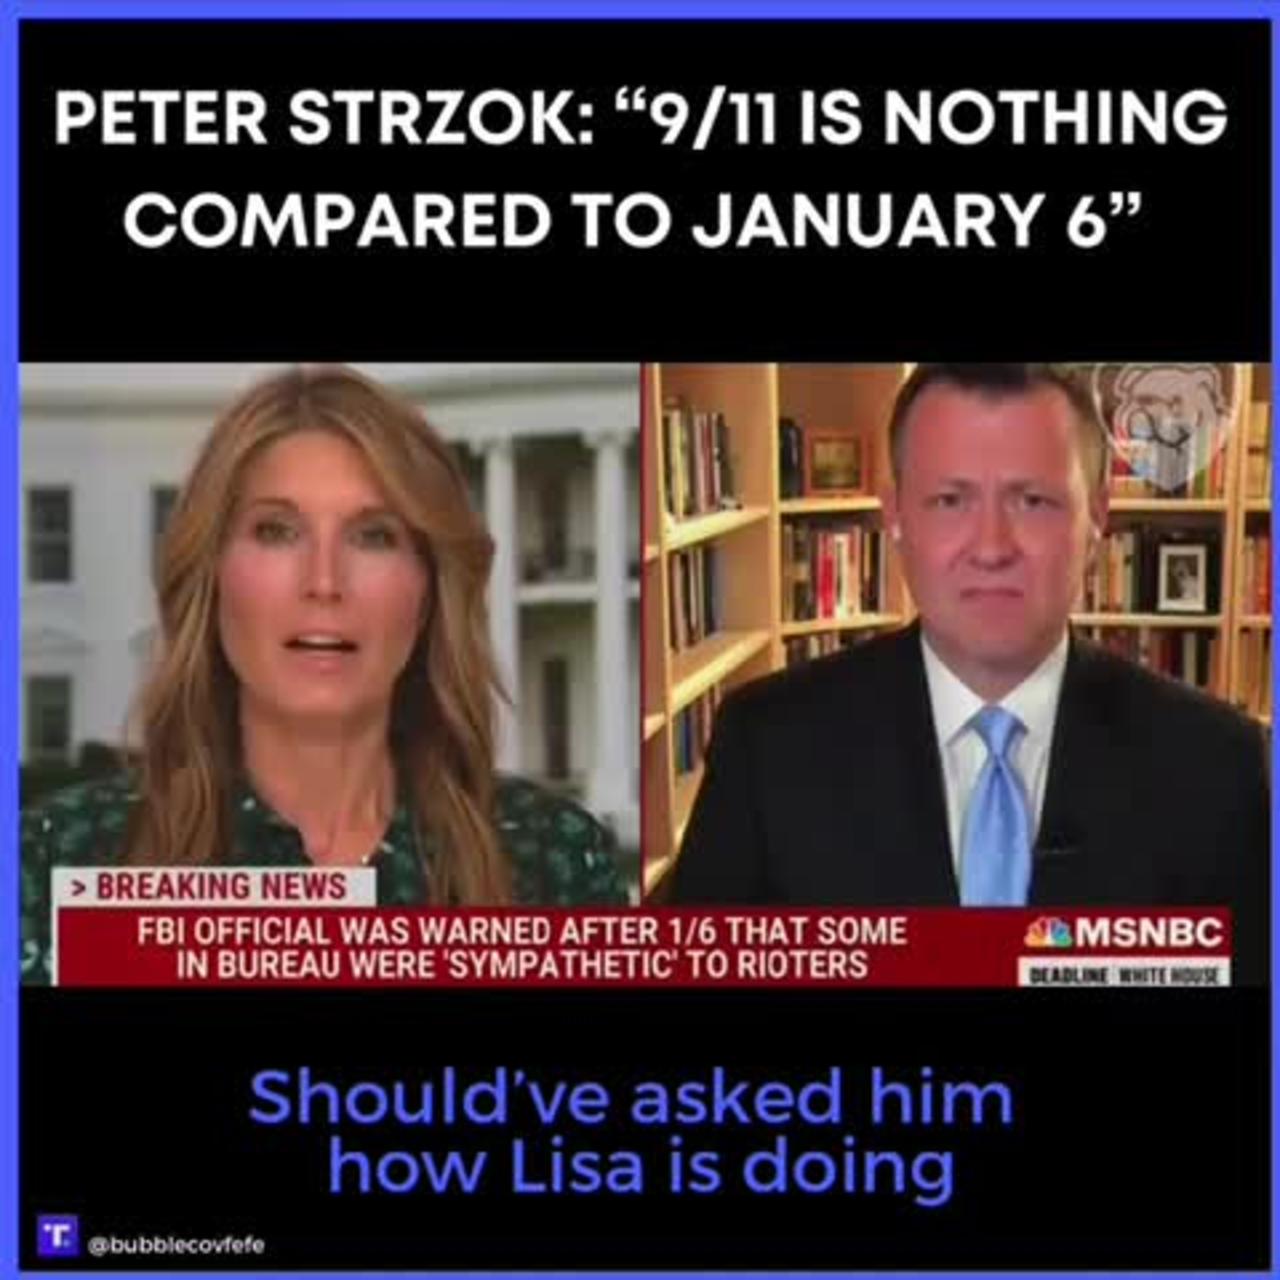 Peter Strzok: “9/11 is Nothing Compared to January 6”